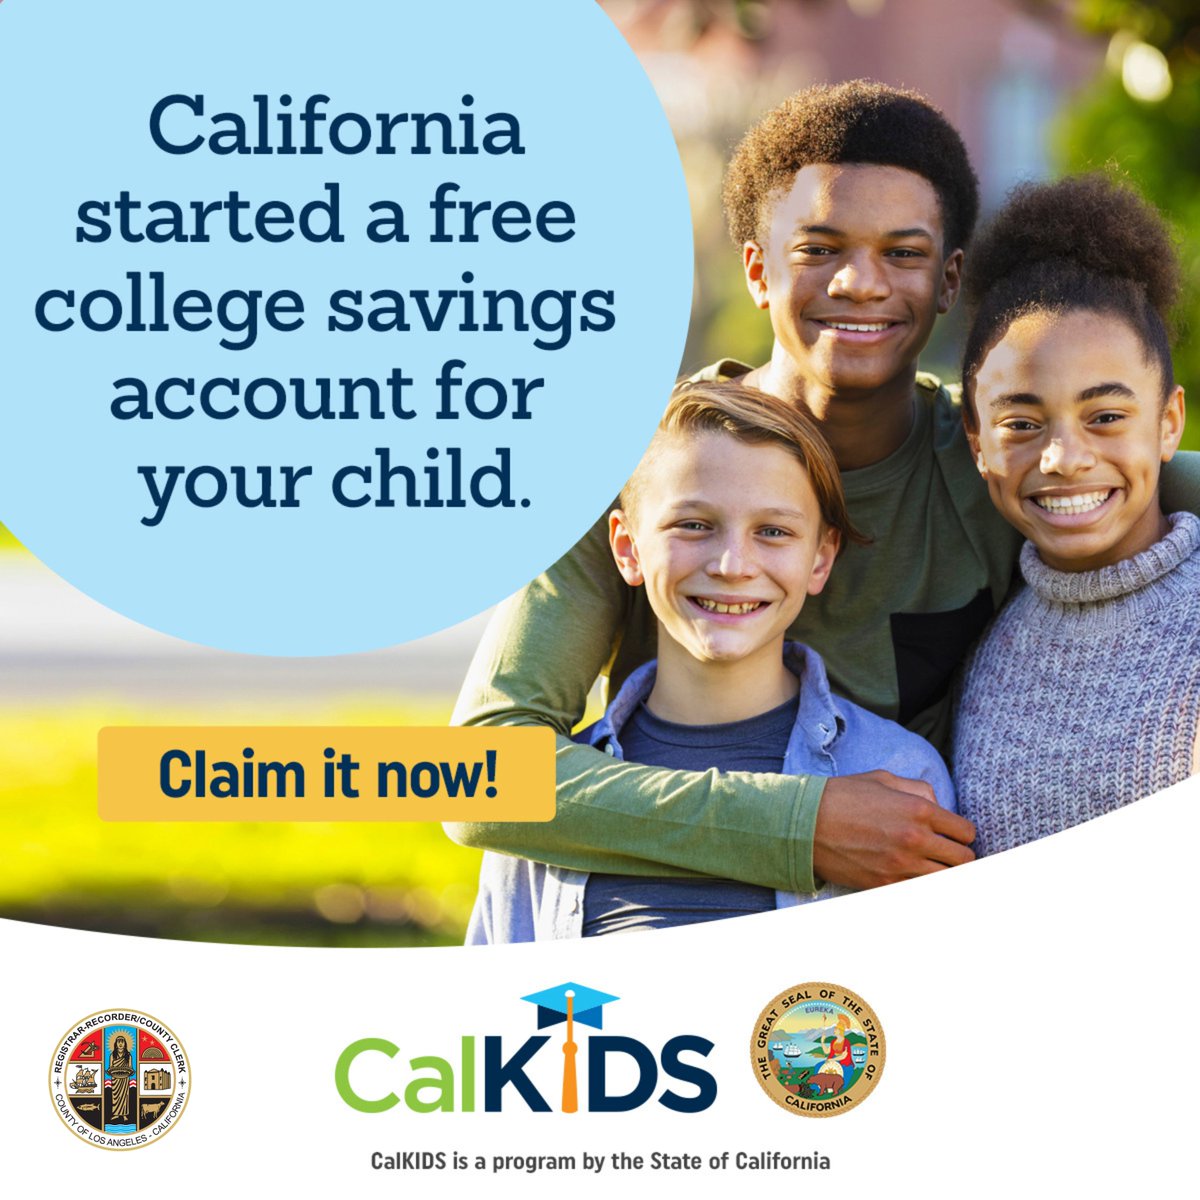 Start investing in their future now with CalKIDS! It's a program from the State of California that provides up to $1,500 in free money for eligible low-income public school students to save for college and career training. Visit bit.ly/CalKIDS-RRCC to claim your account!